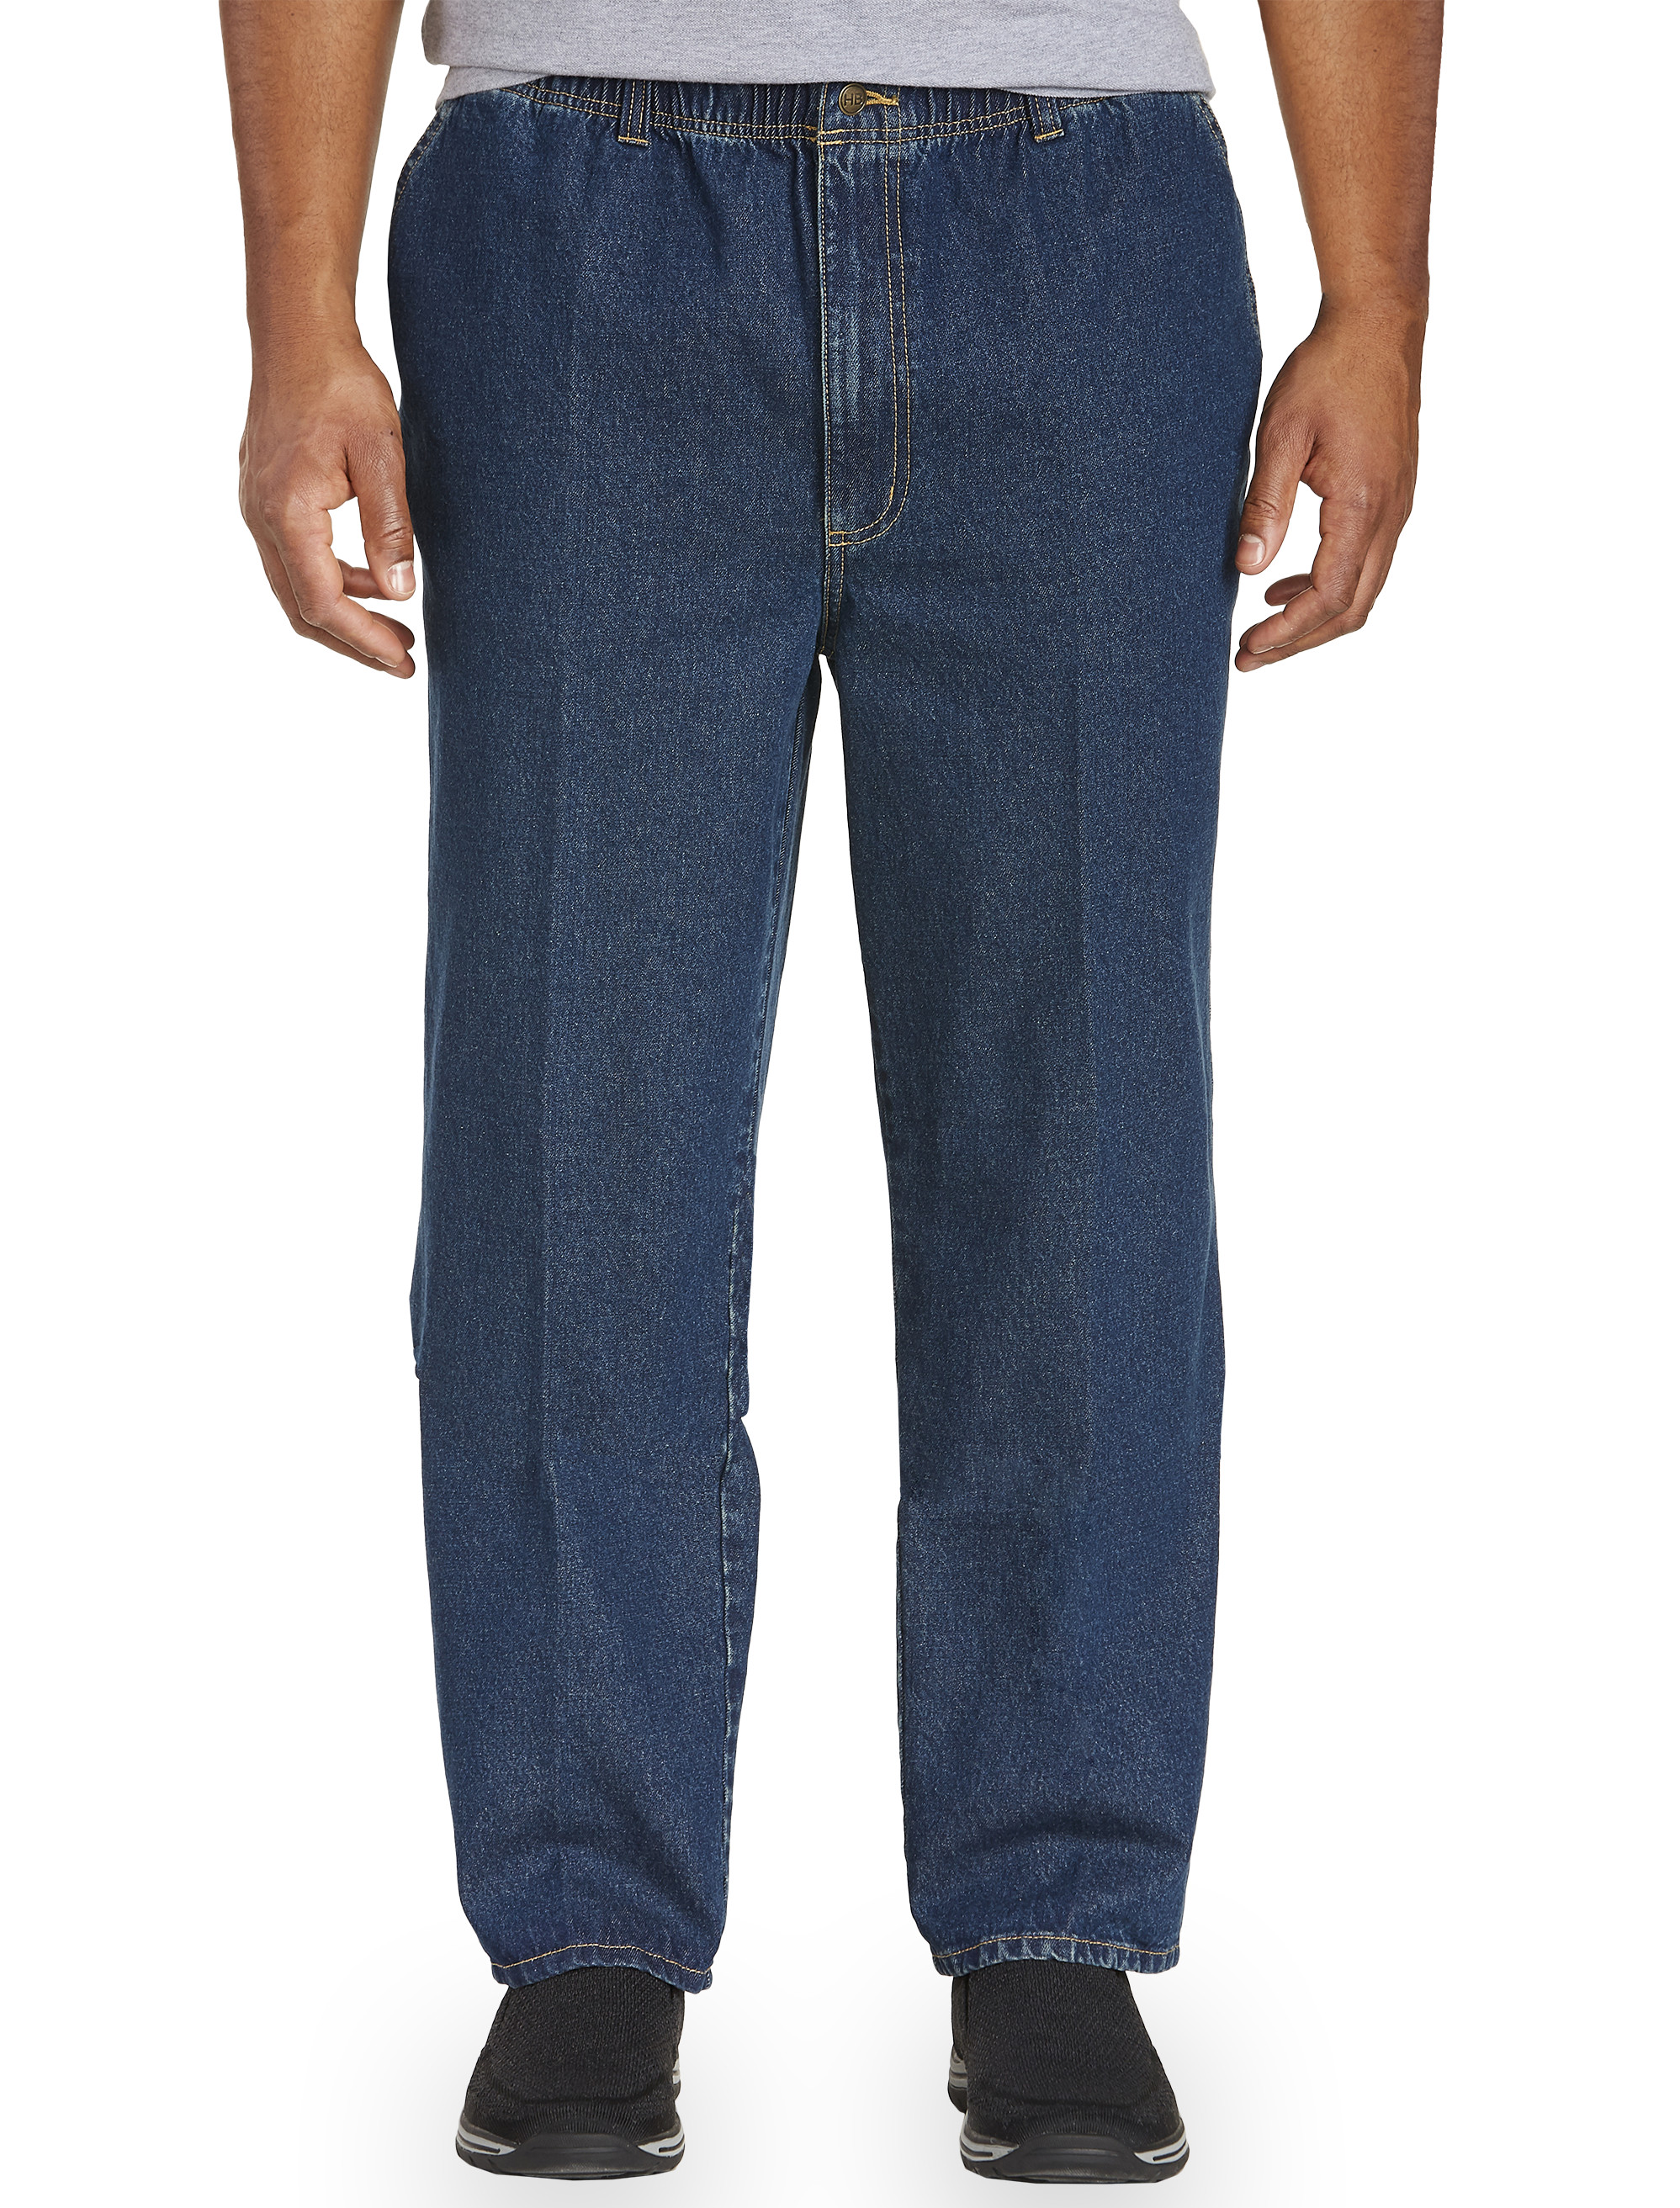 Big + Tall, Harbor Bay Tapered-Fit Full Elastic Jeans